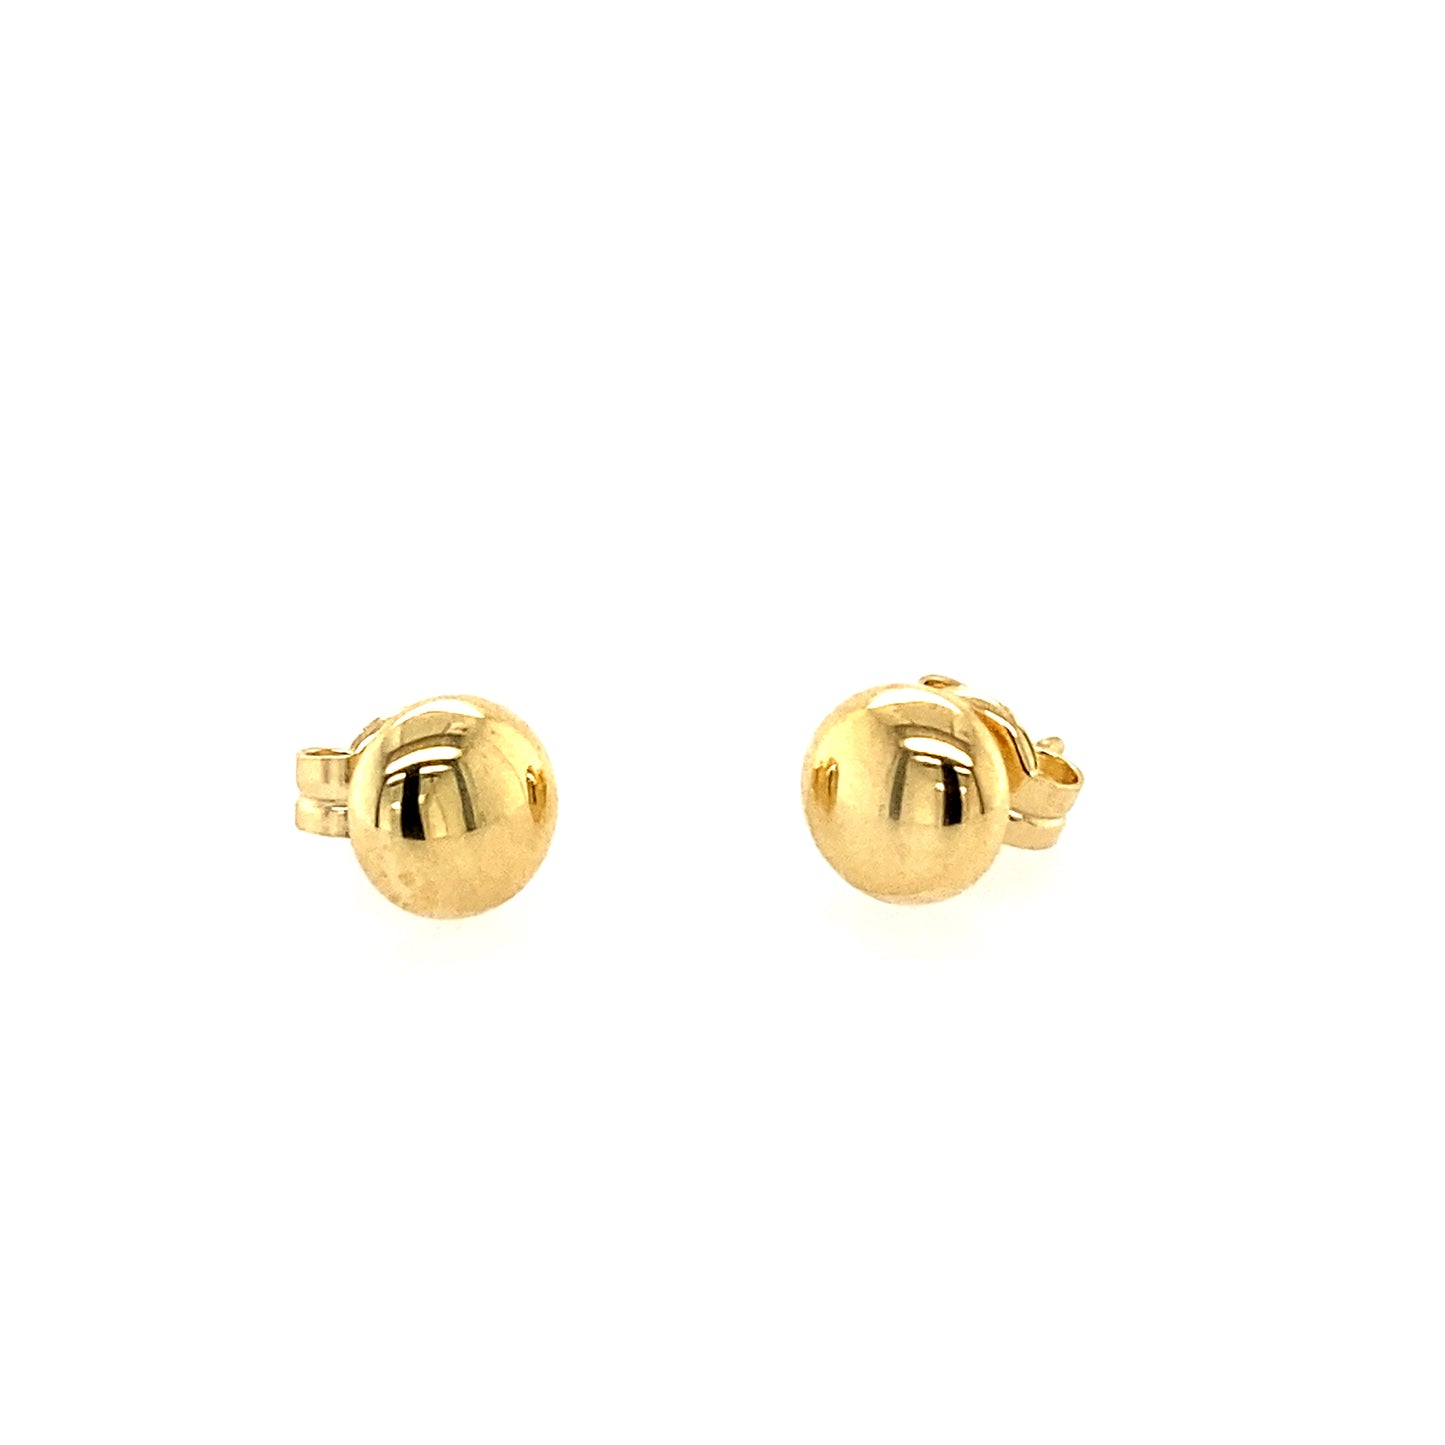 Yellow Gold "D" Shape Stud Earrings  Gardiner Brothers   